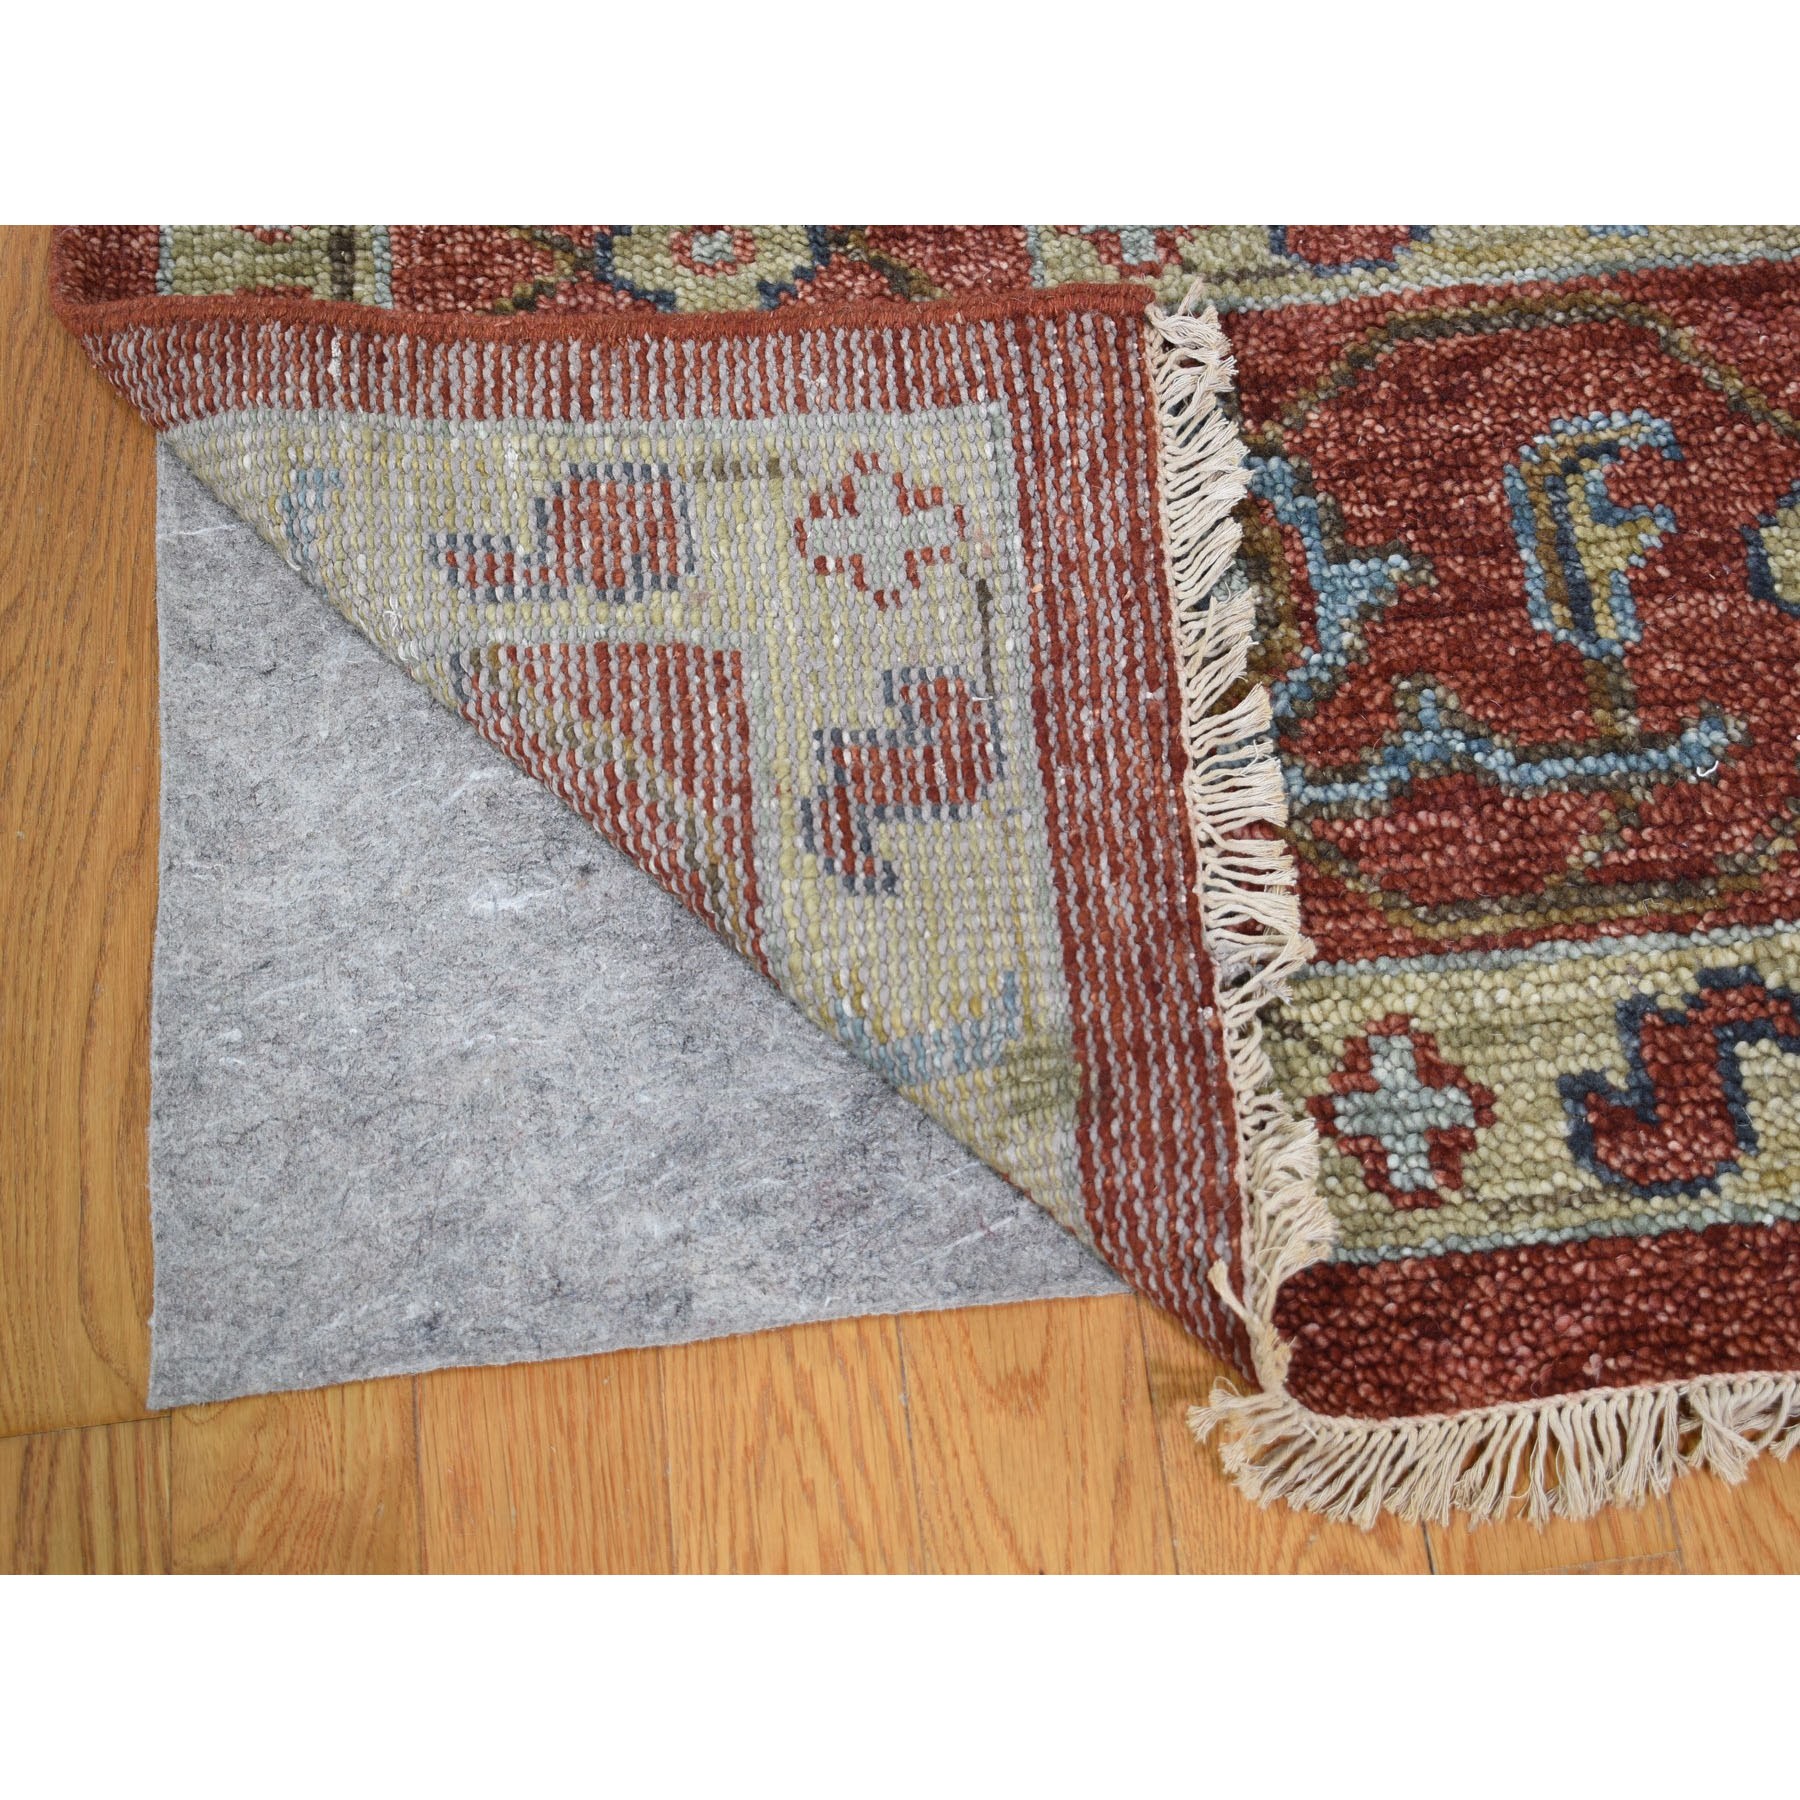 9-10 x14-2   Red Supple Collection Serapi Design Soft wool Hand Knotted Oriental Rug 